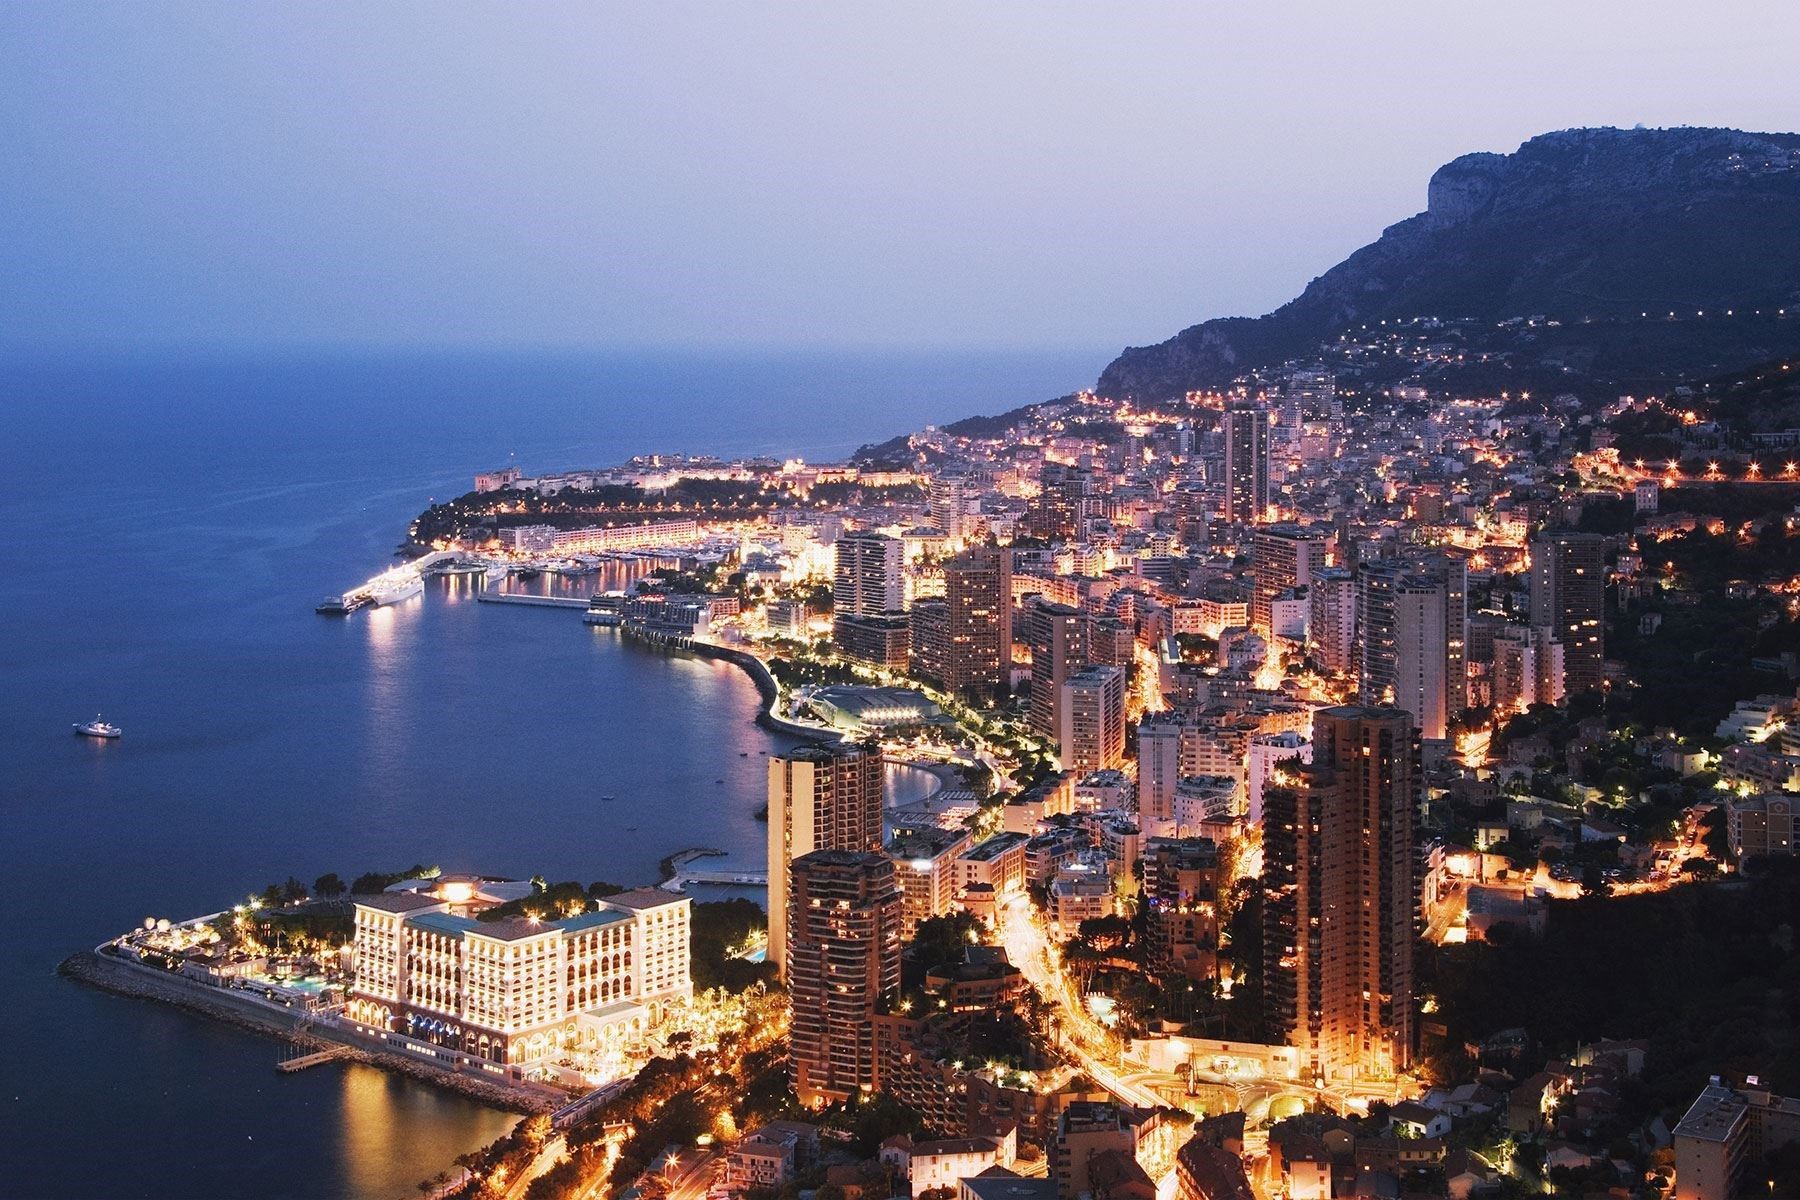 Monte Carlo is synonymous with glamour and decadent living, so it may seem a little unfair to criticise it for just being itself. "Ostentatious and overcrowded", said one reader, while another declared it "conspicuous consumption at its worst".